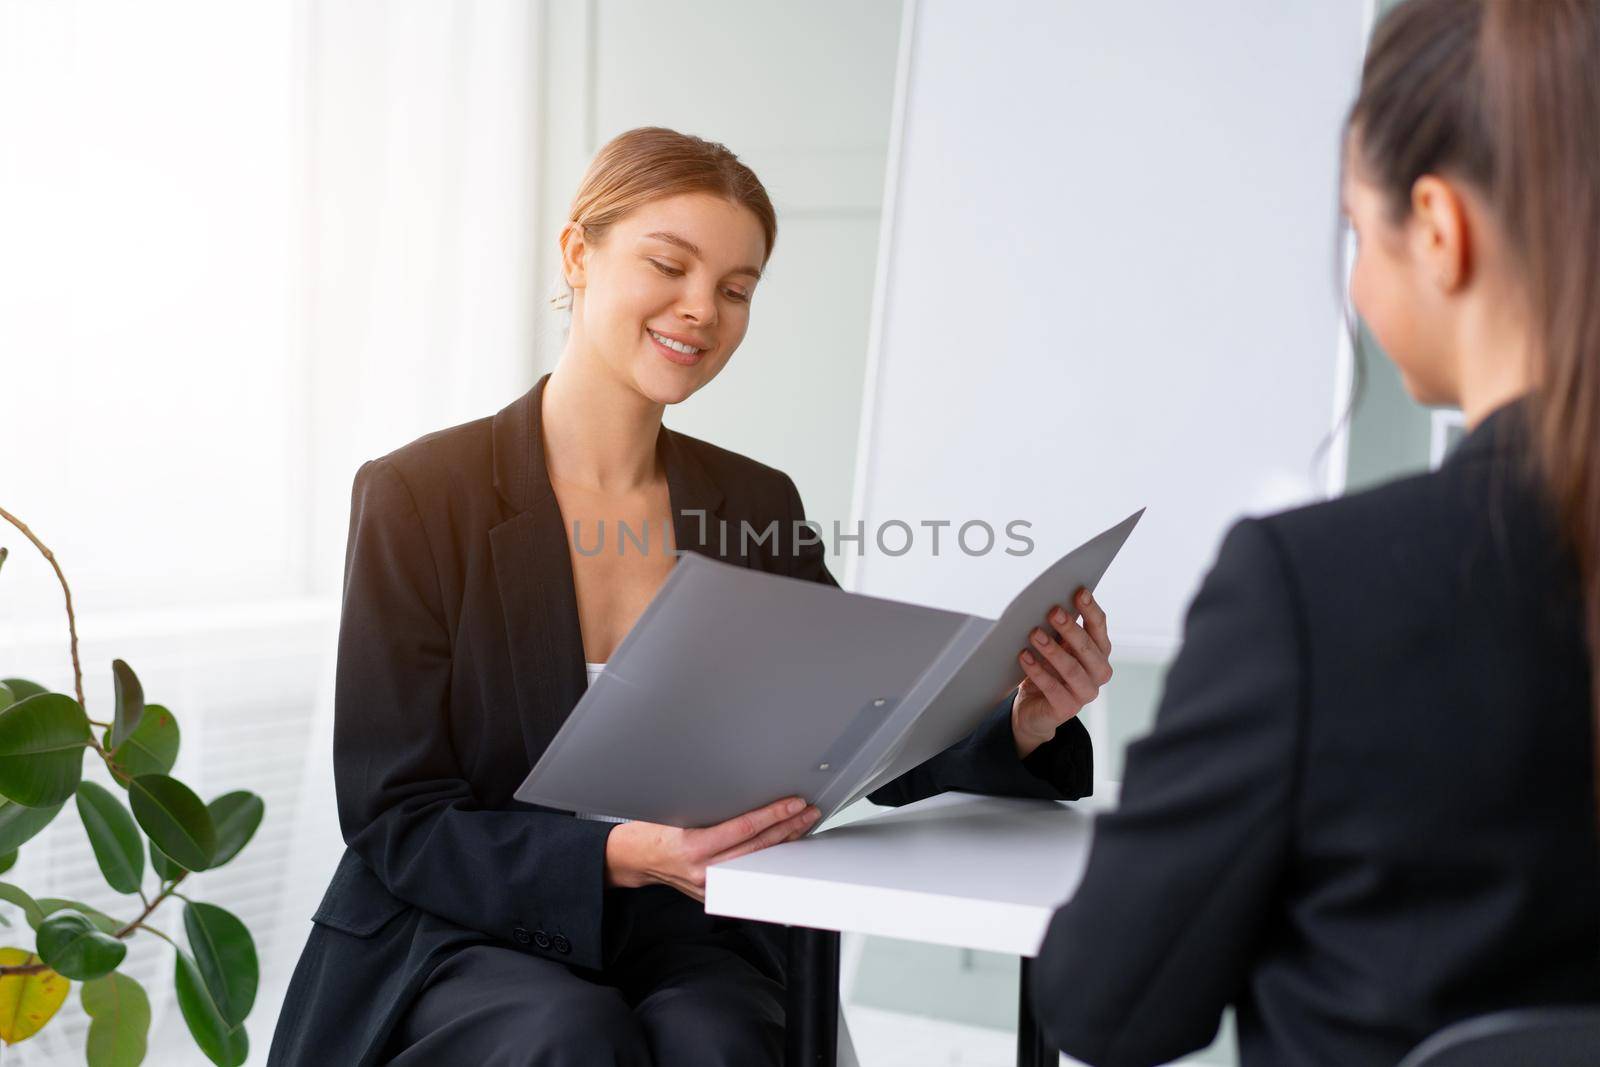 Job interview. Business, career and placement concept. Young blonde woman holding resume, while sitting in front of candidate during corporate meeting or job interview by andreonegin